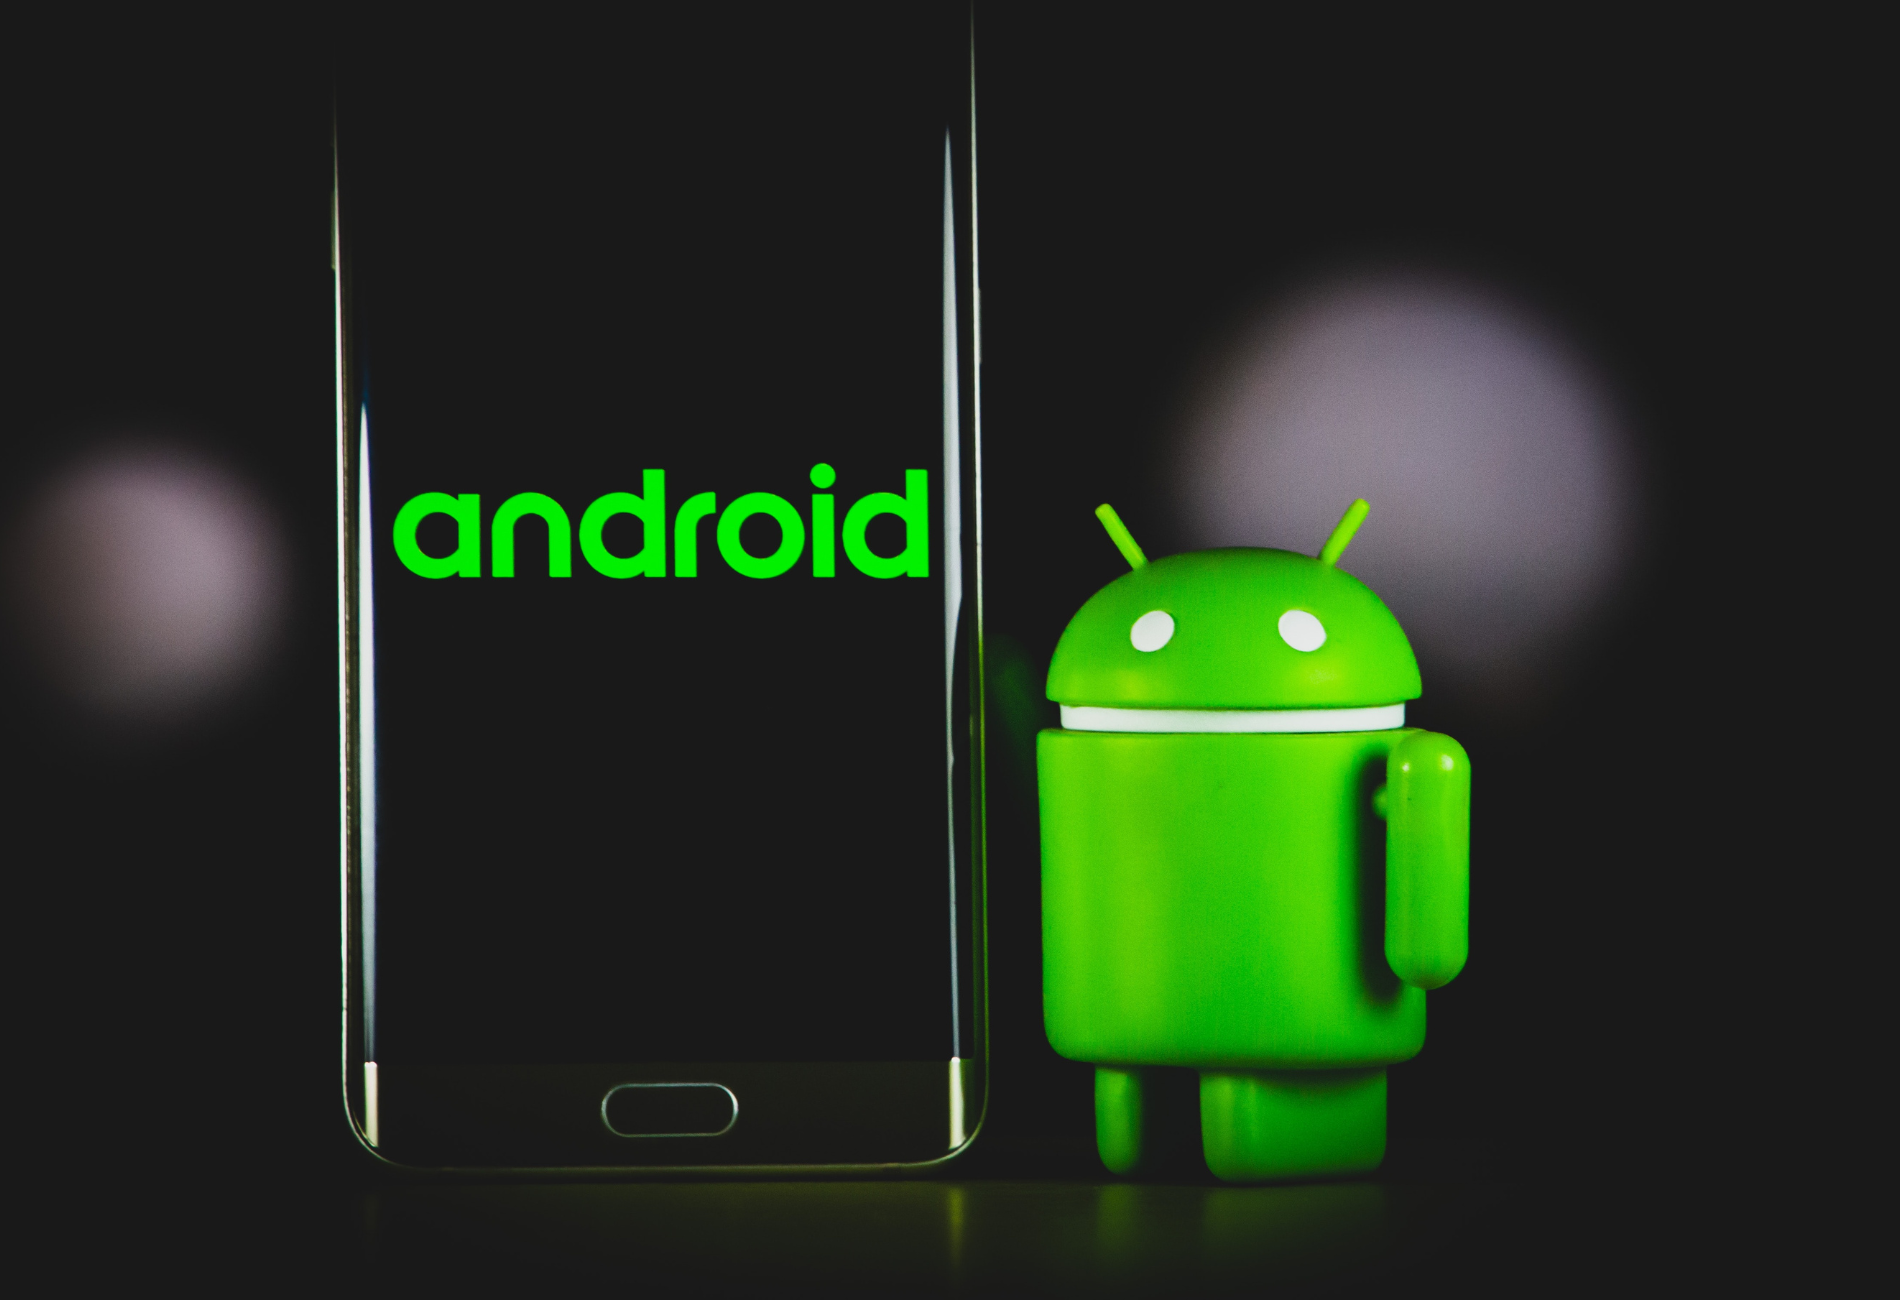 android logo next to a smartphone